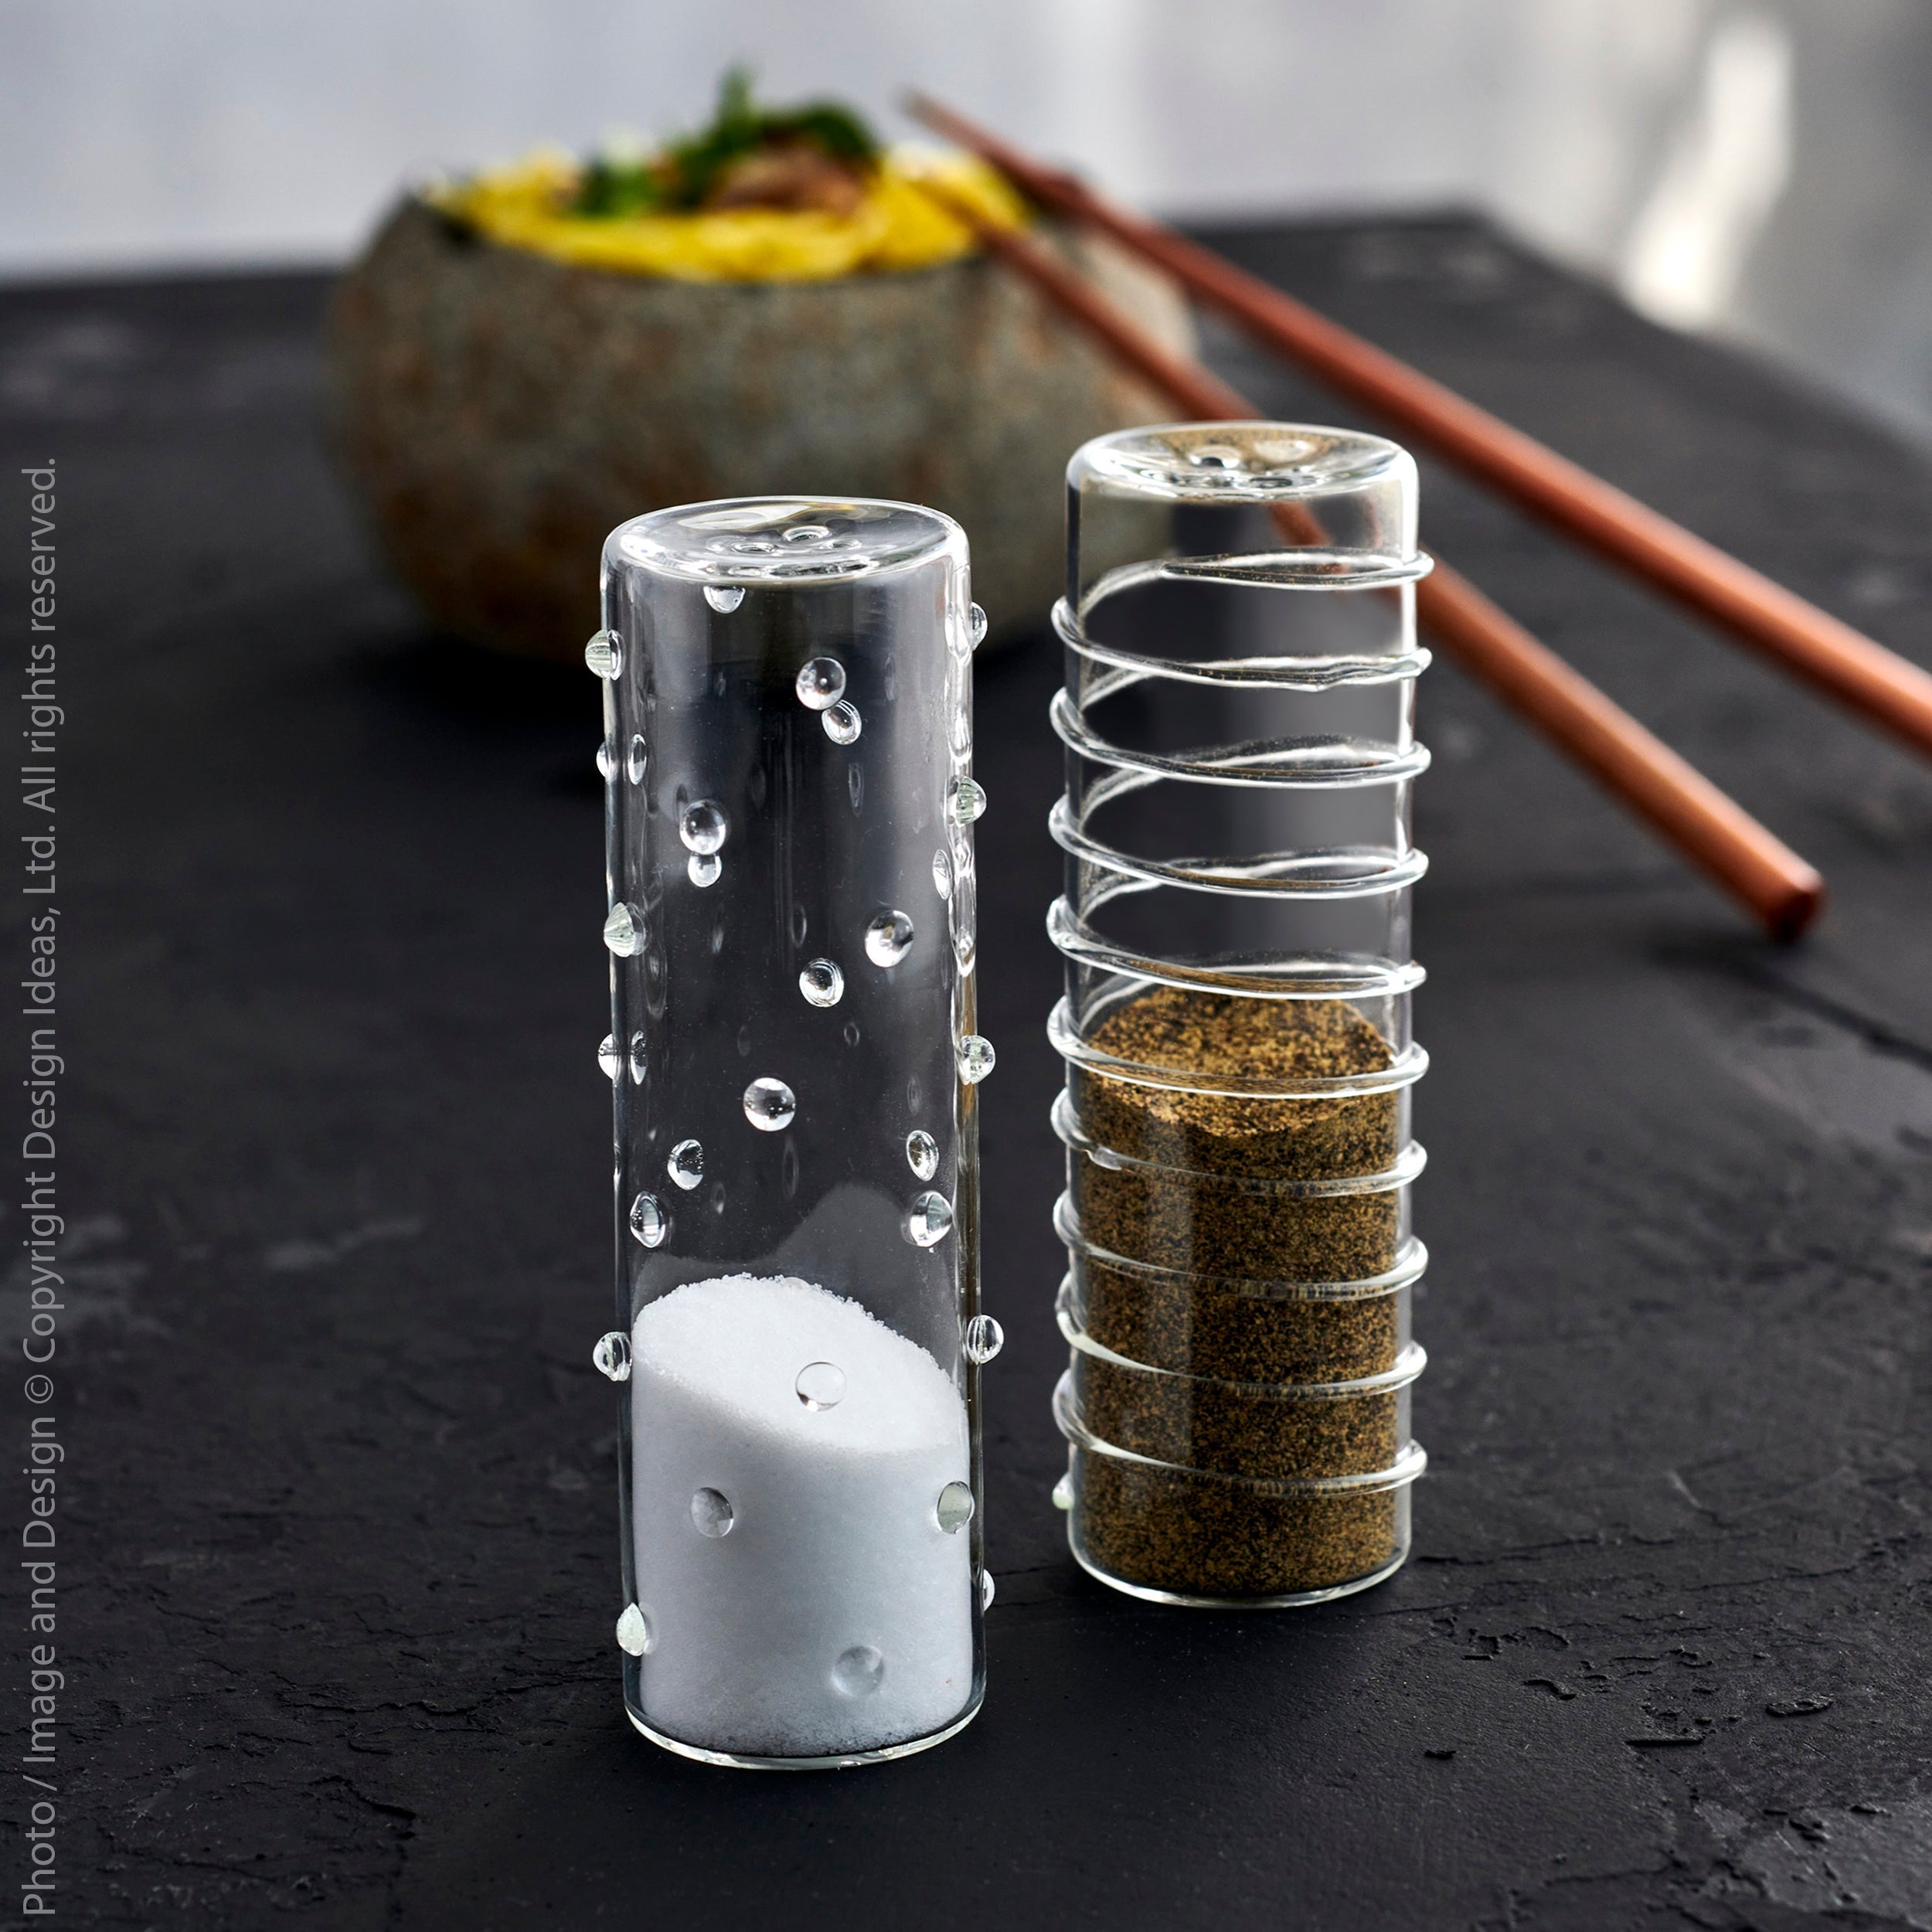 Livenza Borosilicate Glass Salt & Pepper Shakers Black Color | Image 2 | From the Livenza Collection | Exquisitely made with natural borosilicate glass for long lasting use | Available in gray color | texxture home